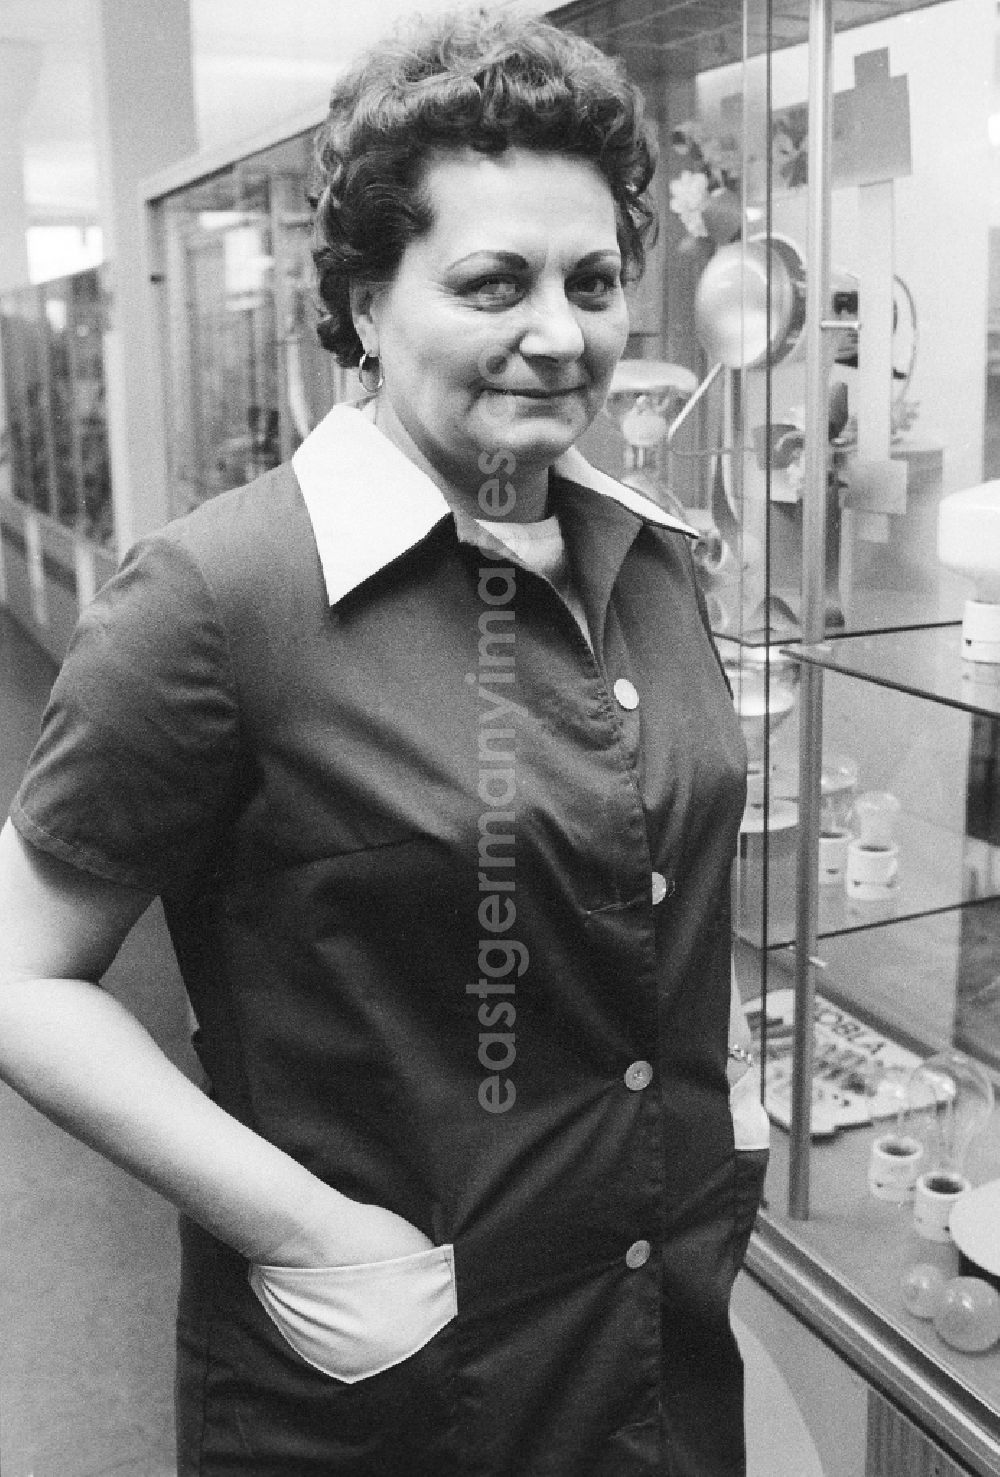 GDR photo archive: Berlin - Portrait of a shop assistant with smock apron and perm in Berlin, the former capital of the GDR, German democratic republic